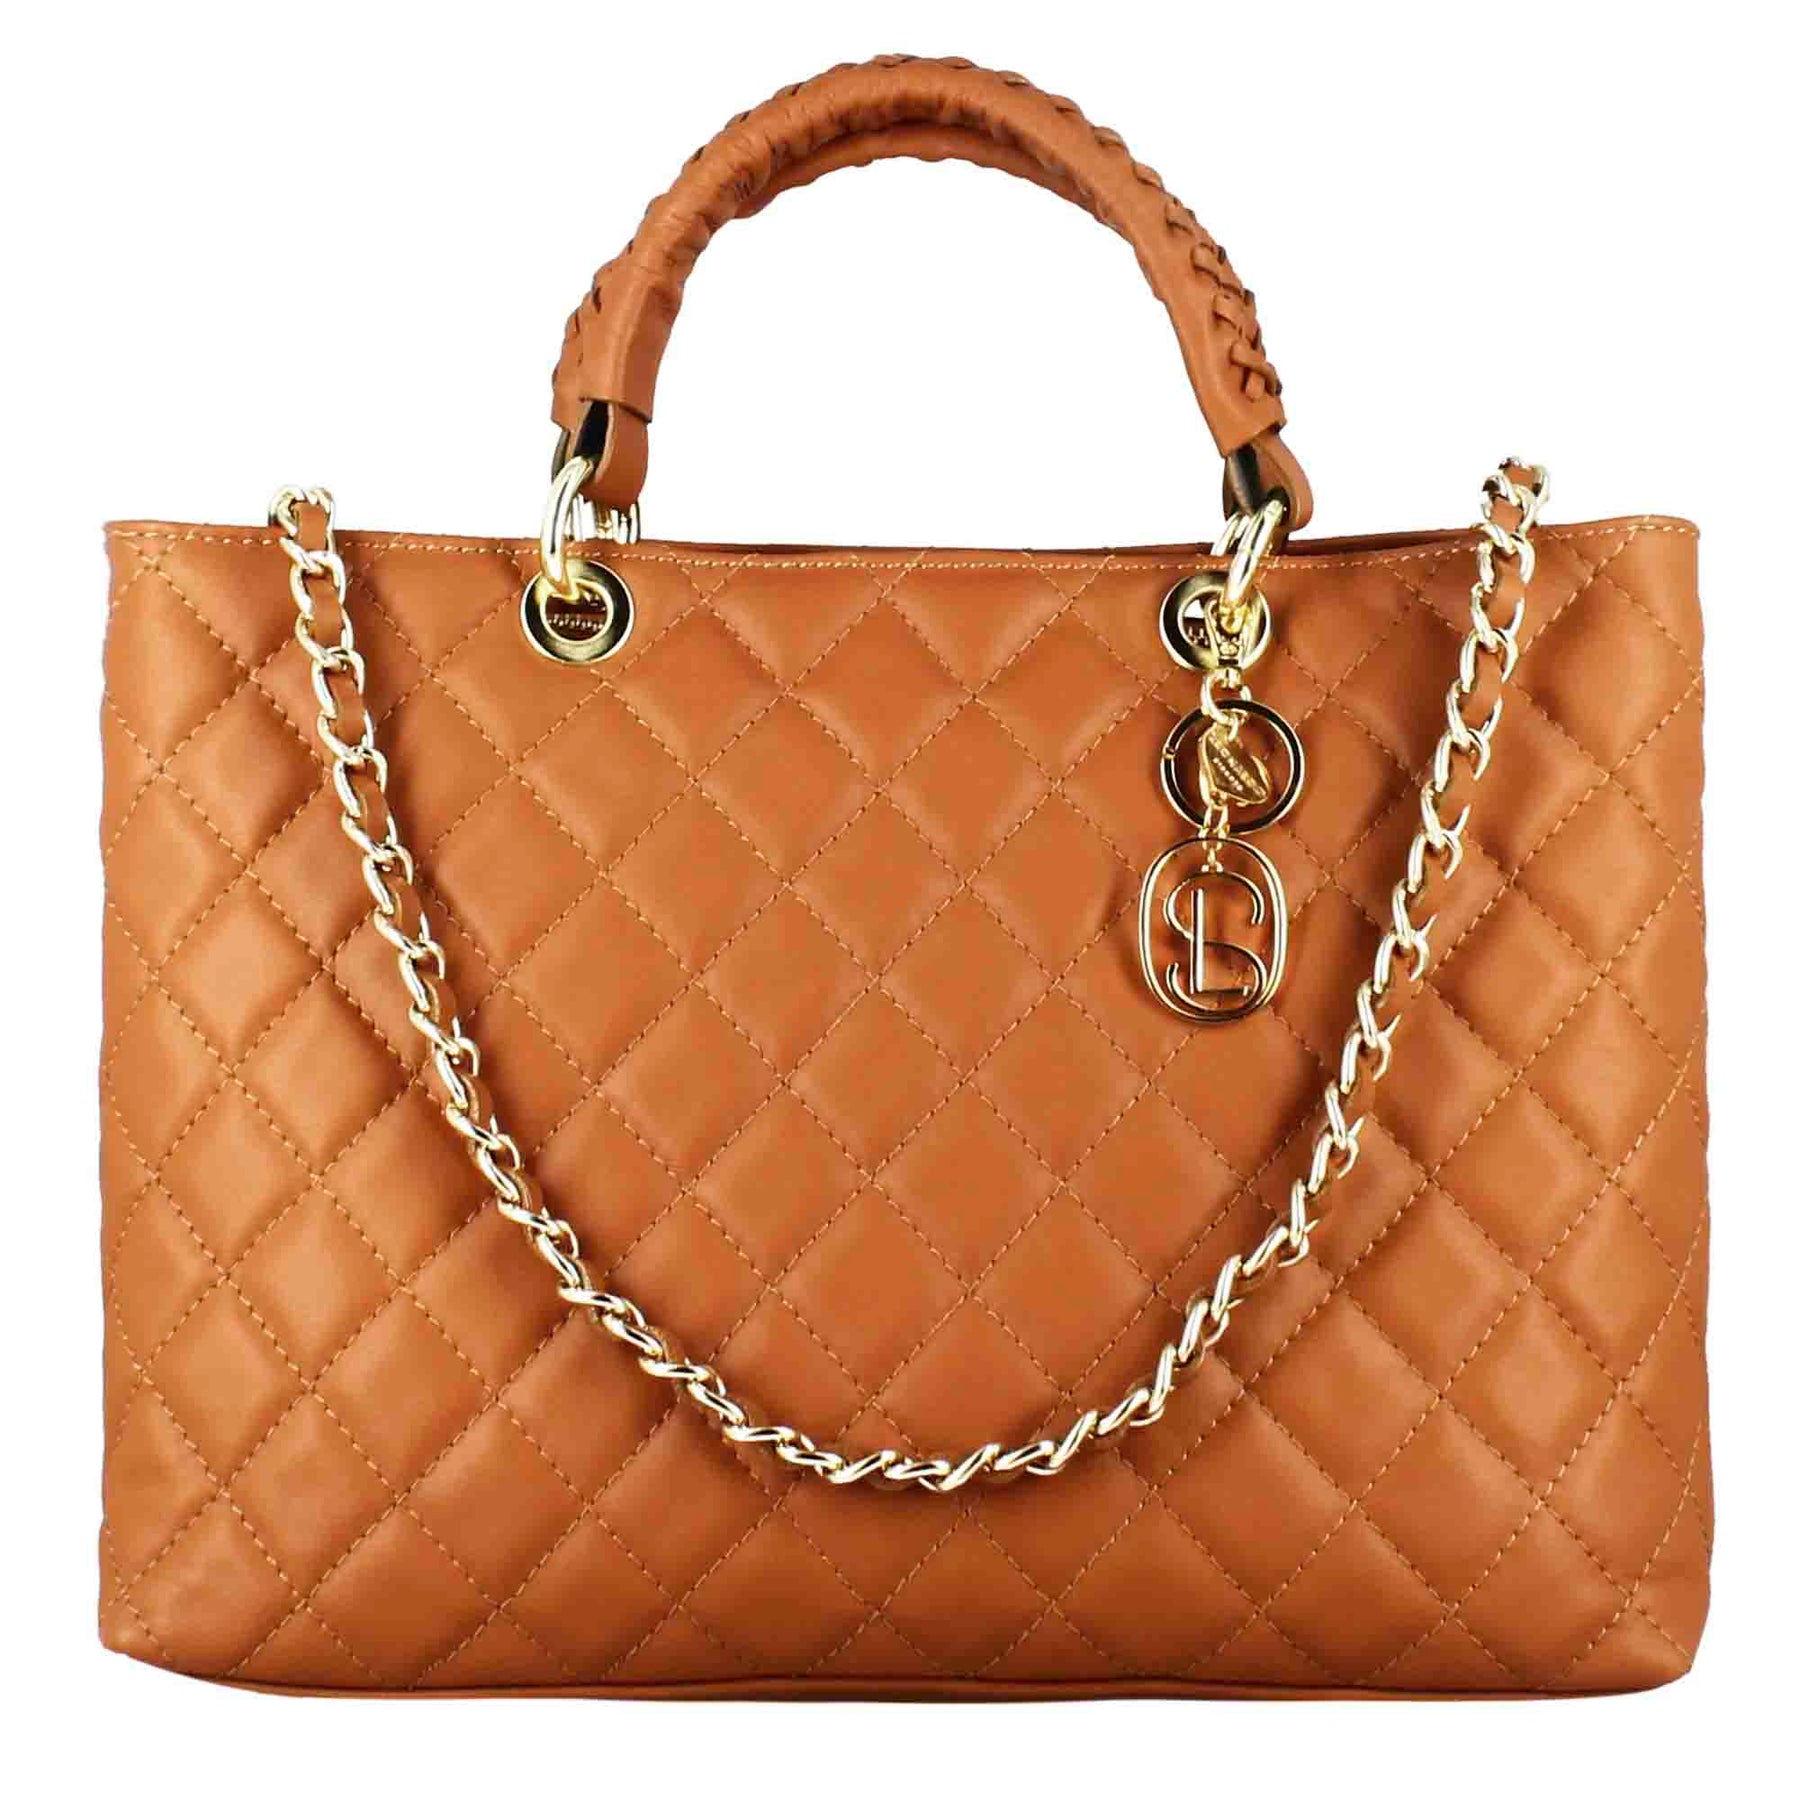 Vanity shopper bag with shoulder strap in brown quilted leather